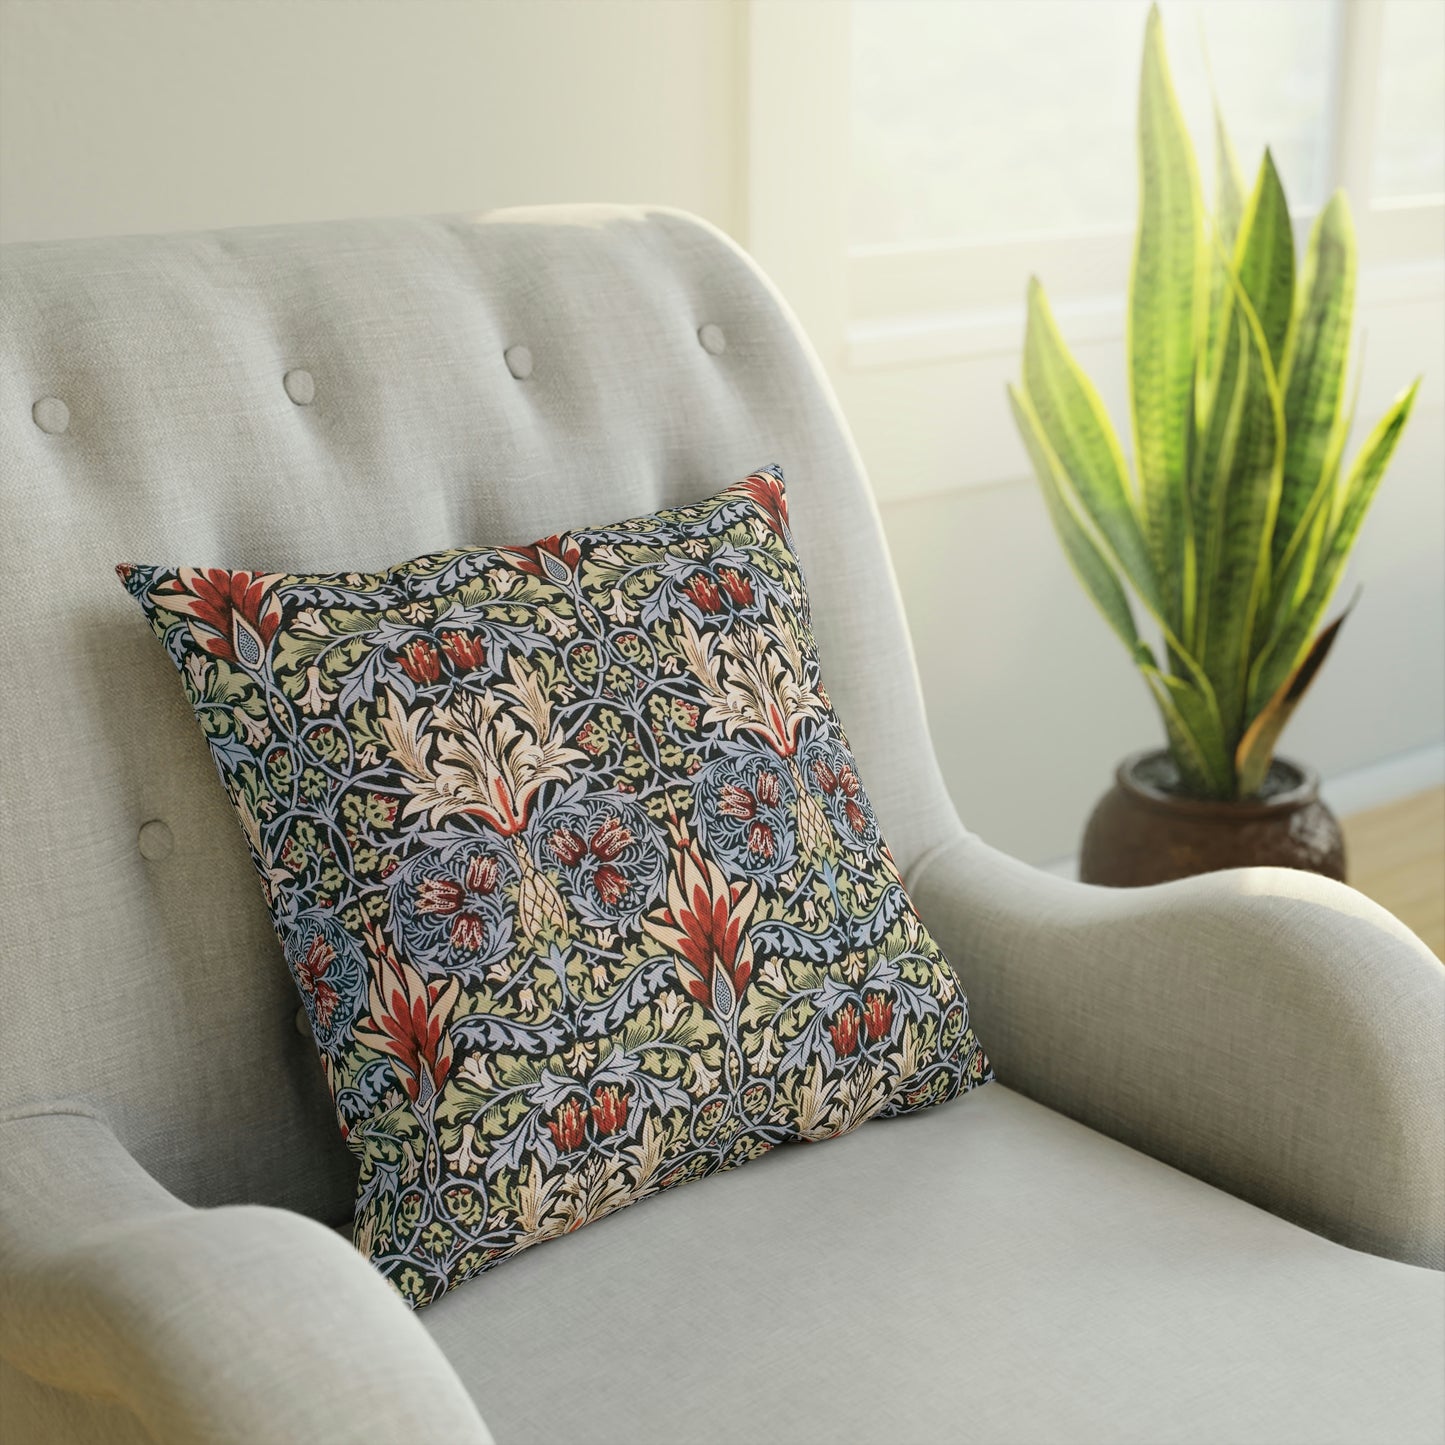 William-Morris-and-Co-Cushion-and-Cushion-Cover-Snakeshead-Collection-4